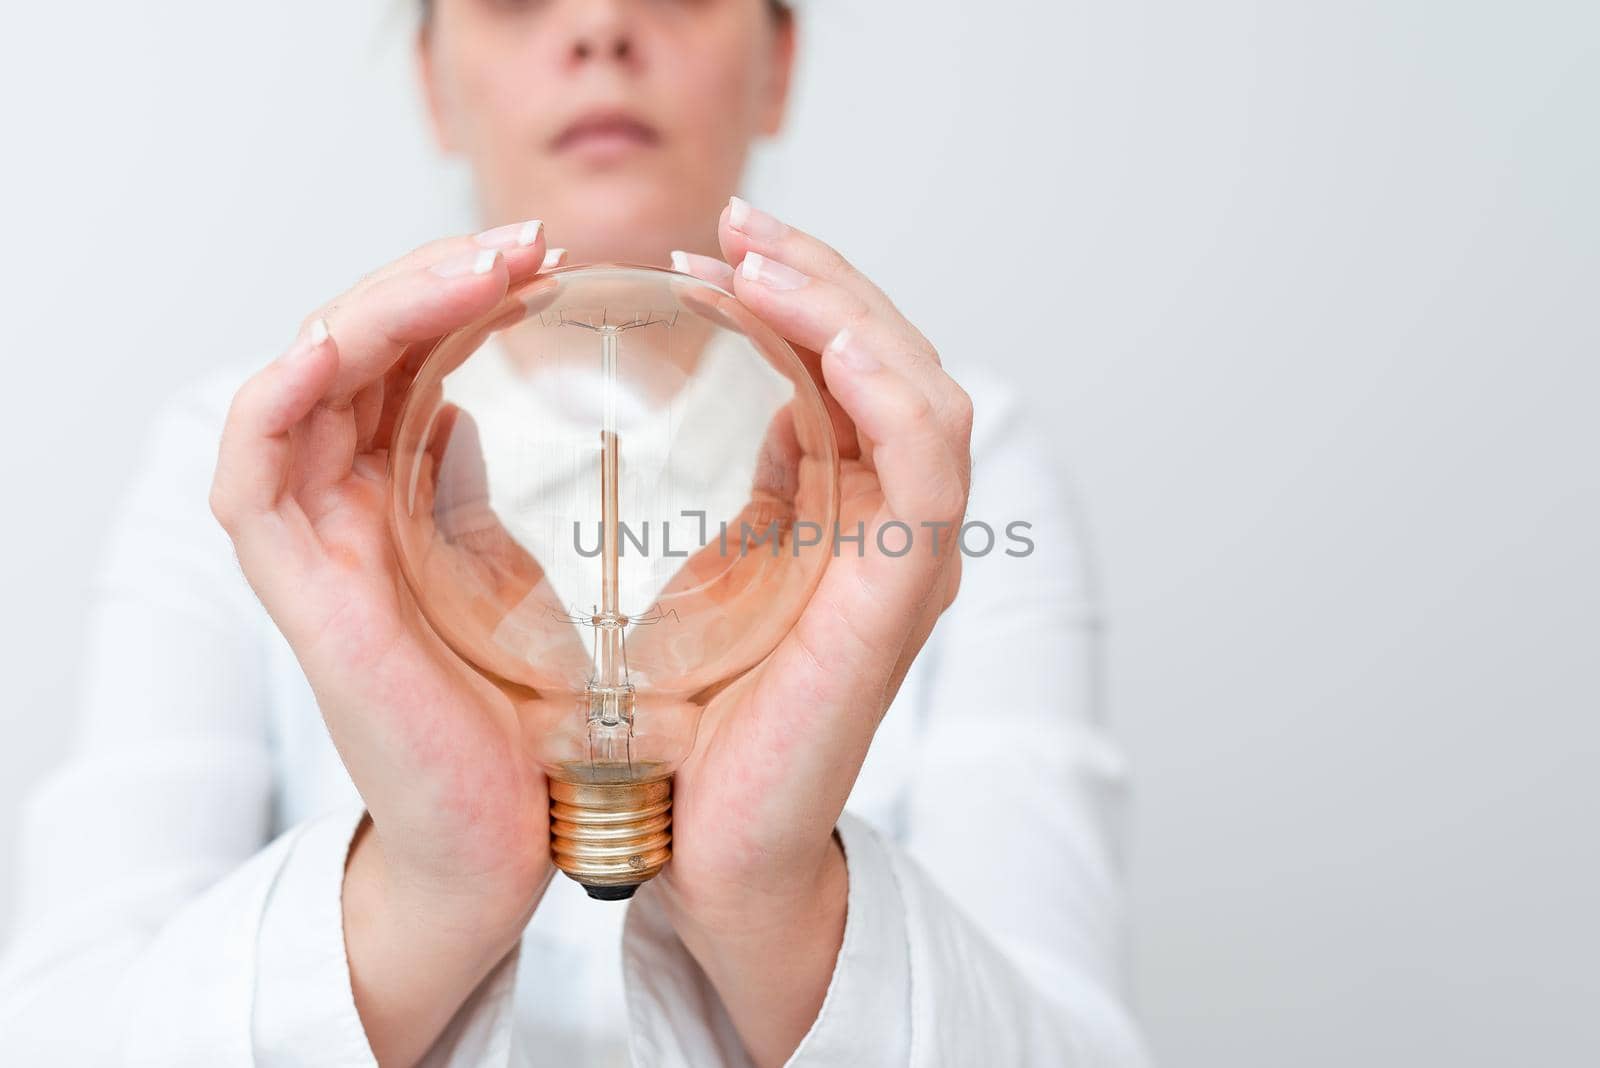 Lady Holding Lamp With Formal Outfit Presenting New Ideas For Project, Business Woman Showing Bulb With Two Hands Exhibiting New Technologies, Lightbulb Presenting Another Openion.